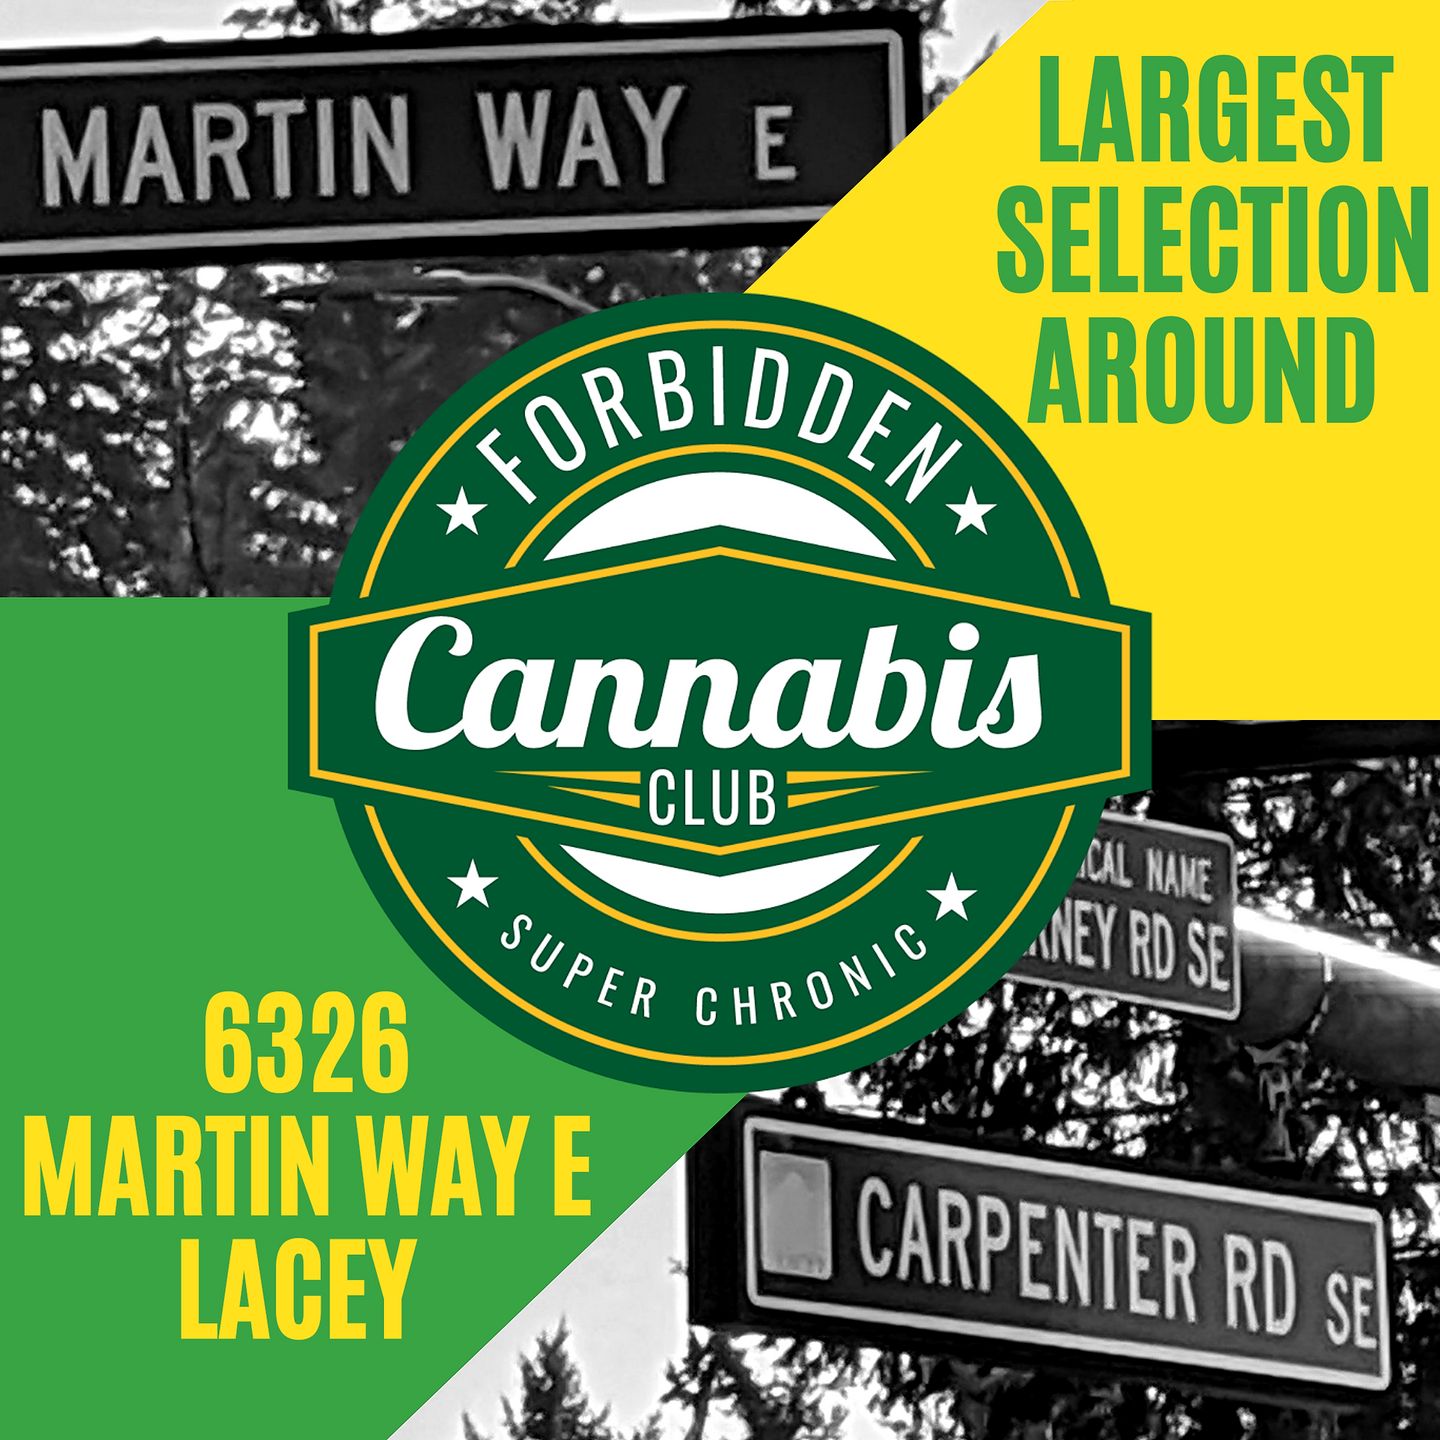 image feature Lacey - Forbidden Cannabis Club